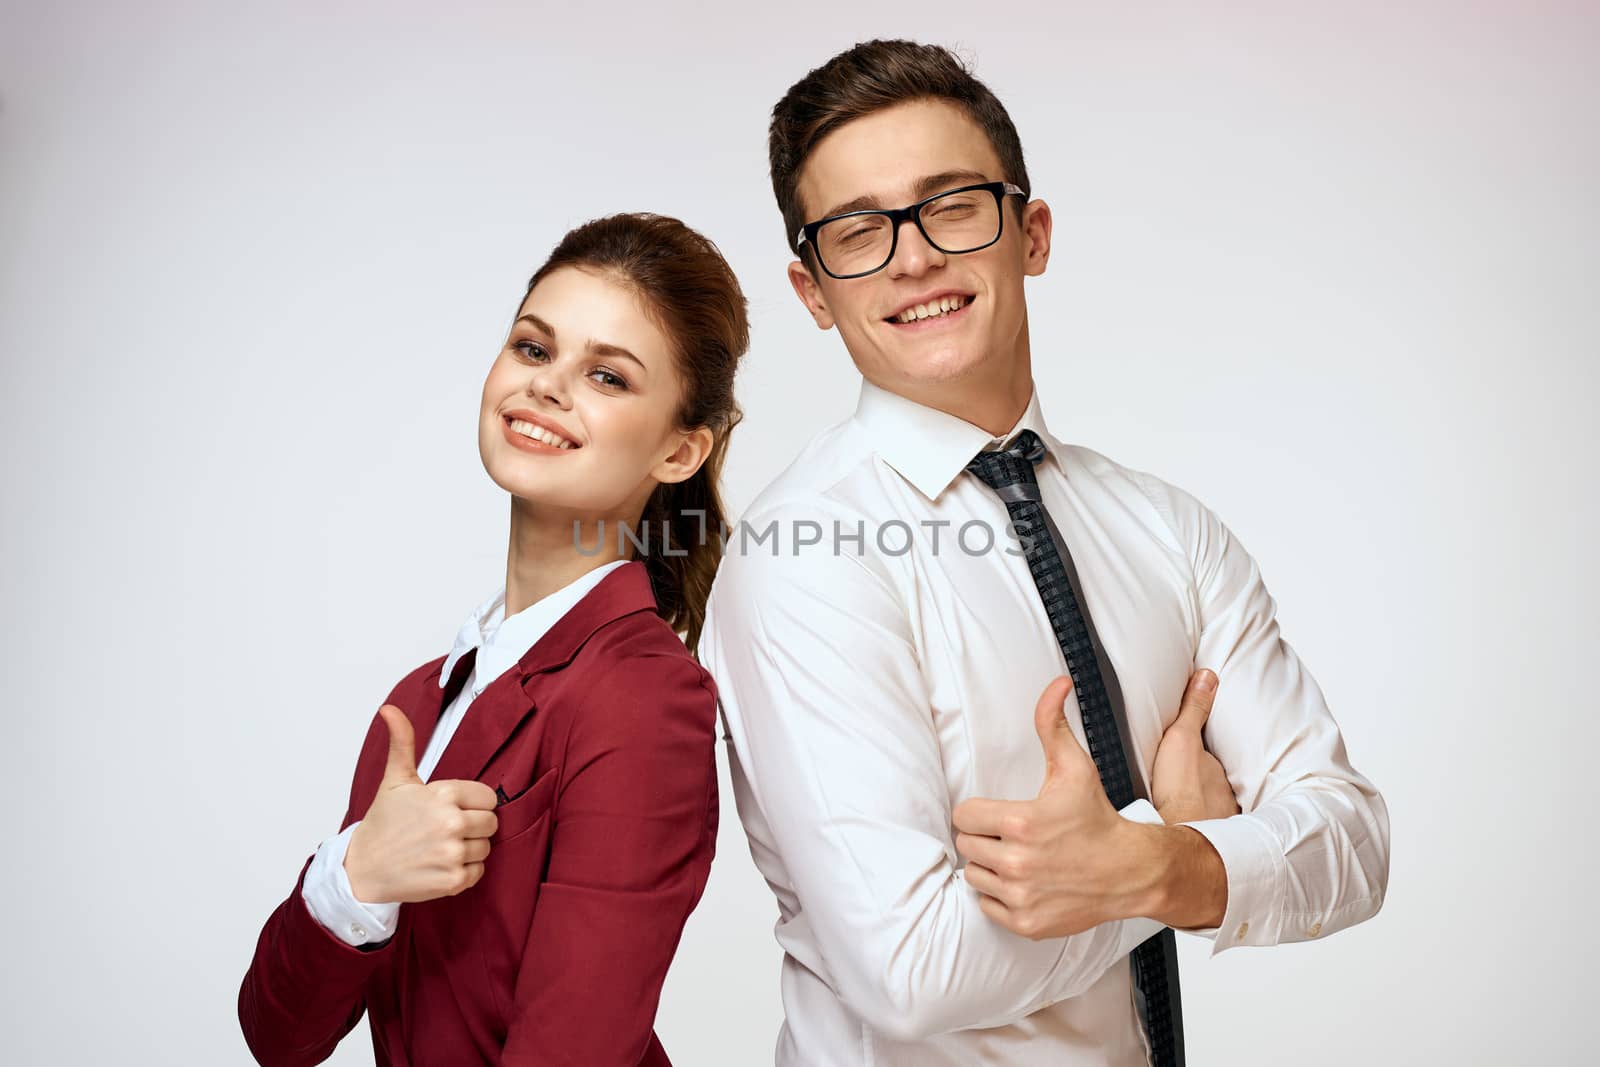 Work colleagues Business couple office officials team studio light background. High quality photo